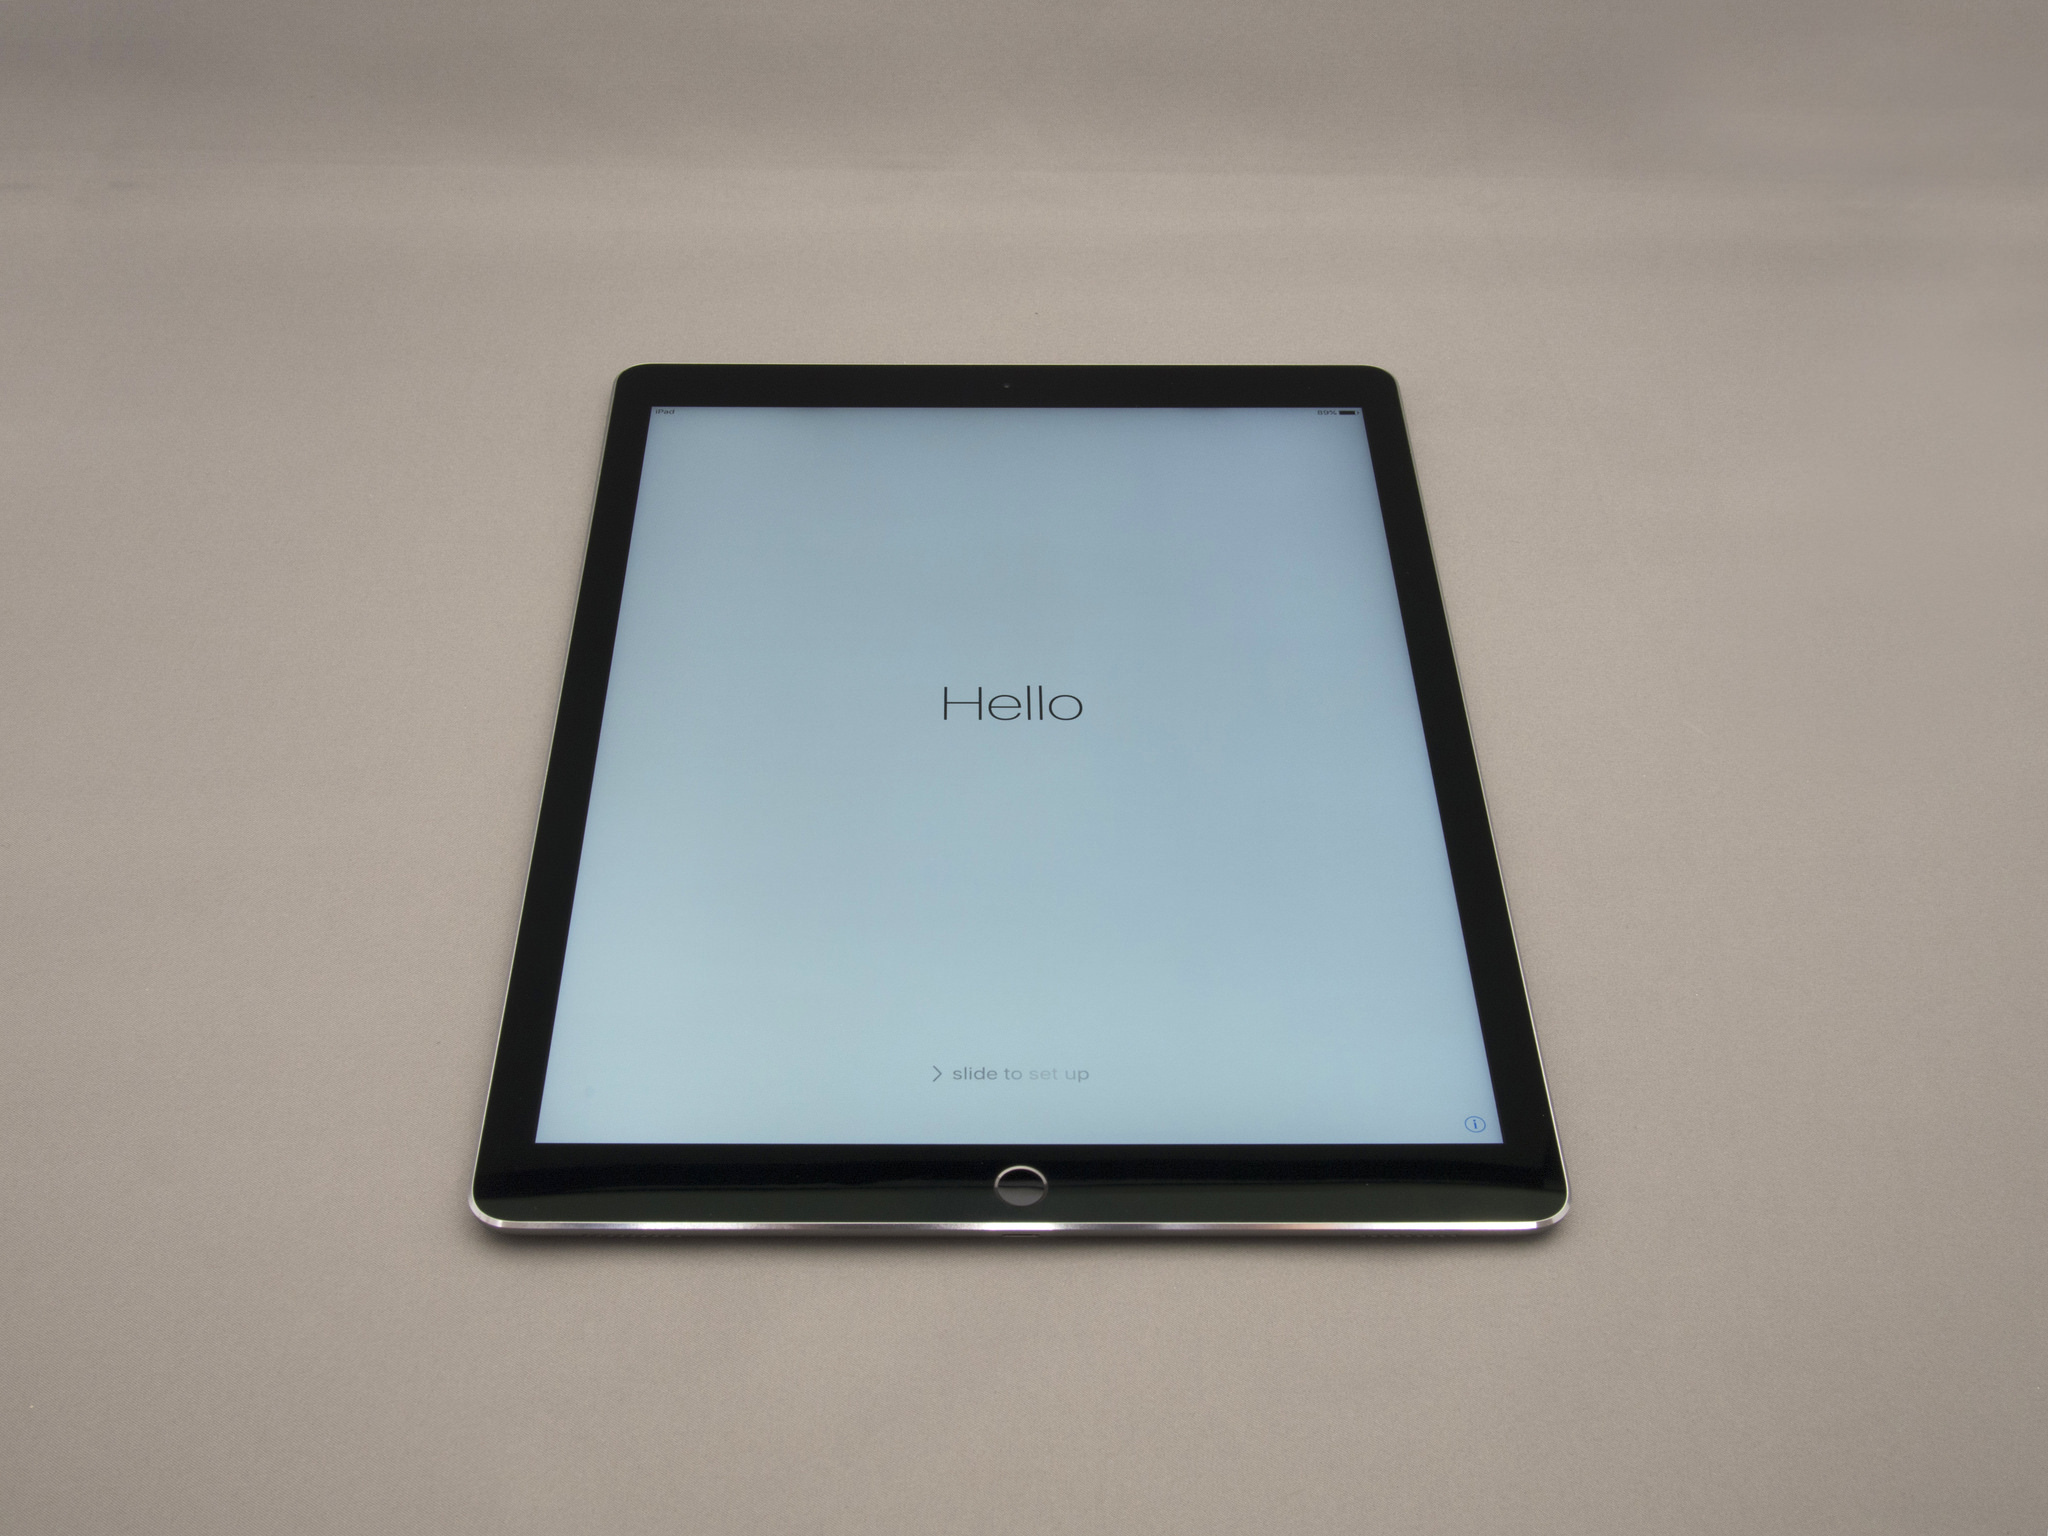 The latest whispers on the street point to an early April 2017 debut for the 10.5-inch iPad Pro. What are some of the hardware specifications that we can expect to see from the latest tablet should that be the case?